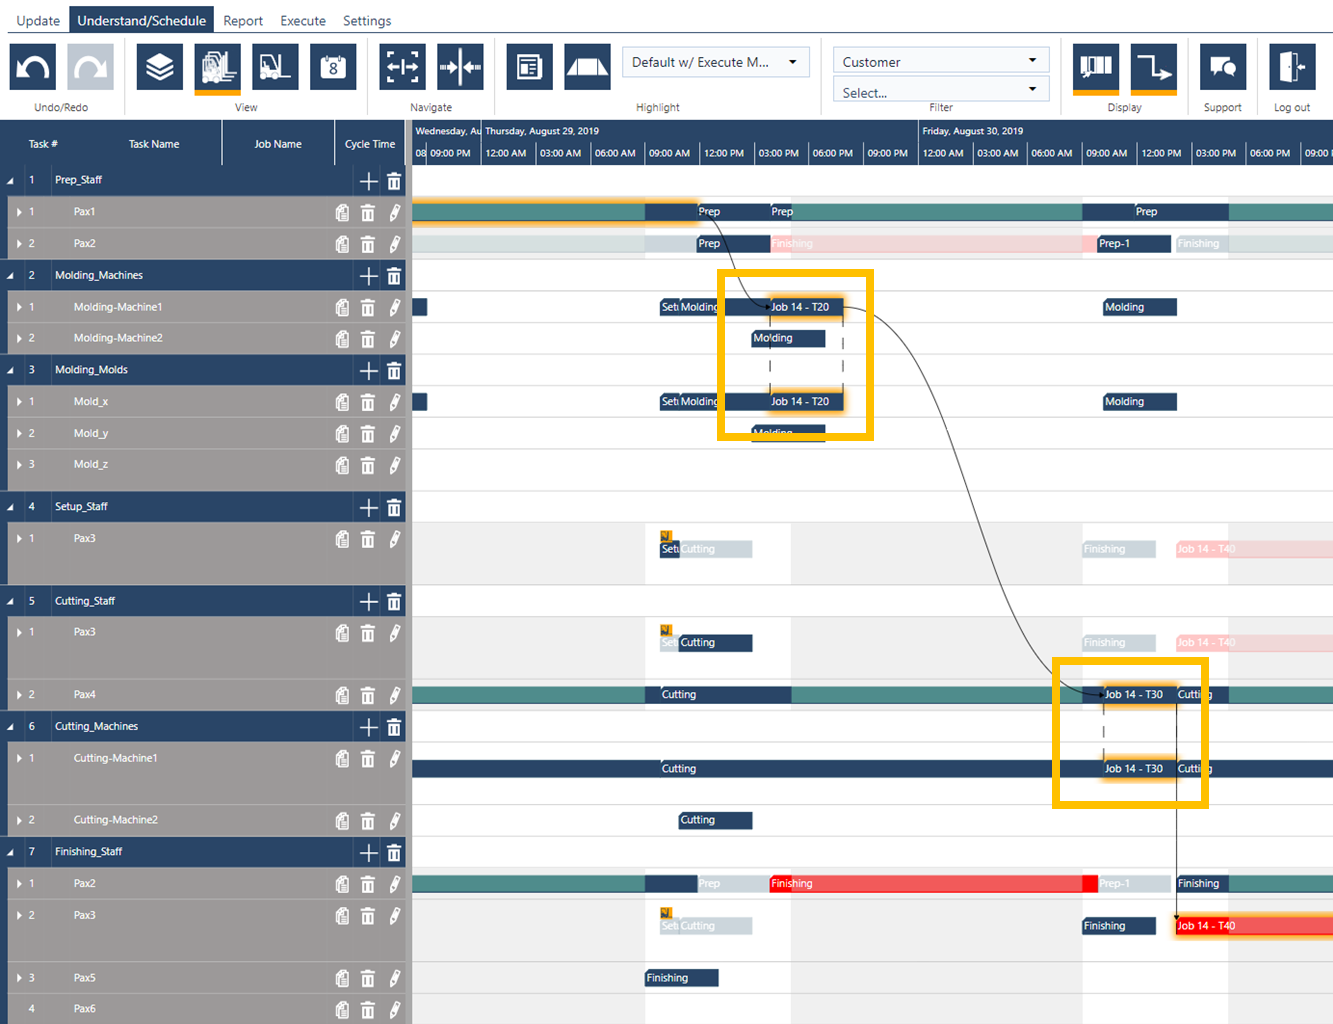 Enhanced Production scheduling capabilities